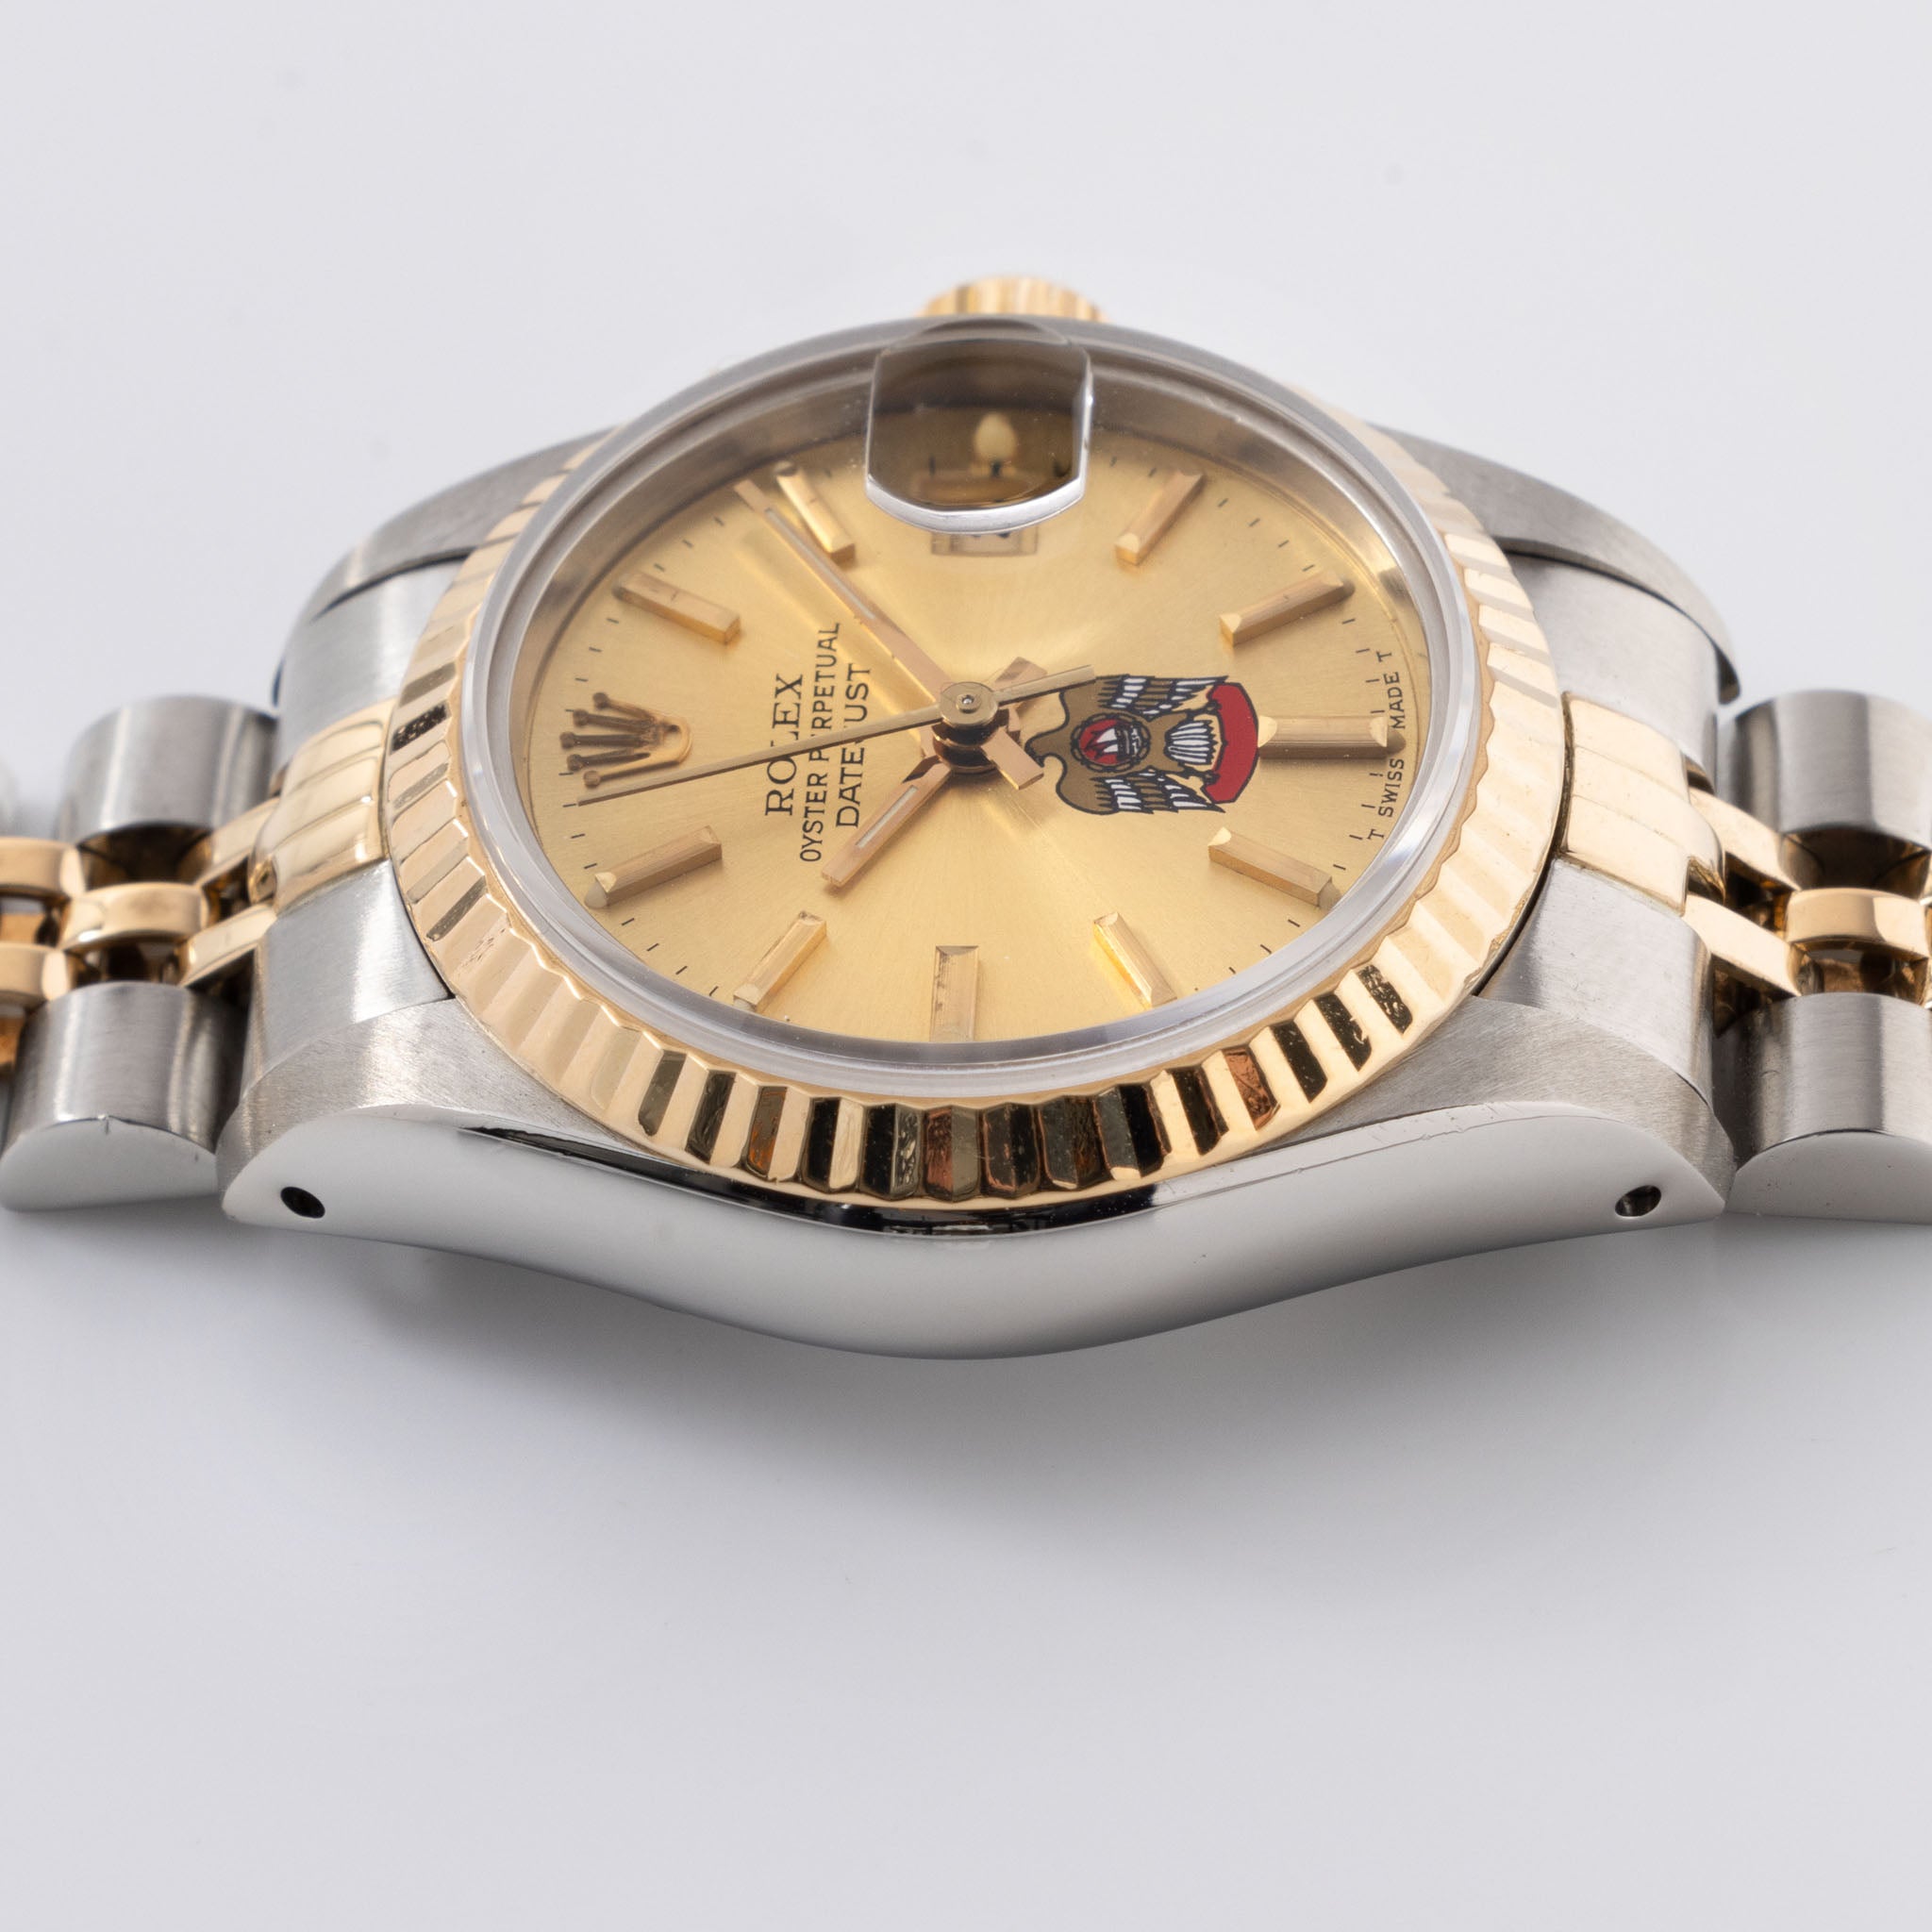 Rolex Lady Datejust Steel and Gold UAE Desert Eagle Dial Ref 69173